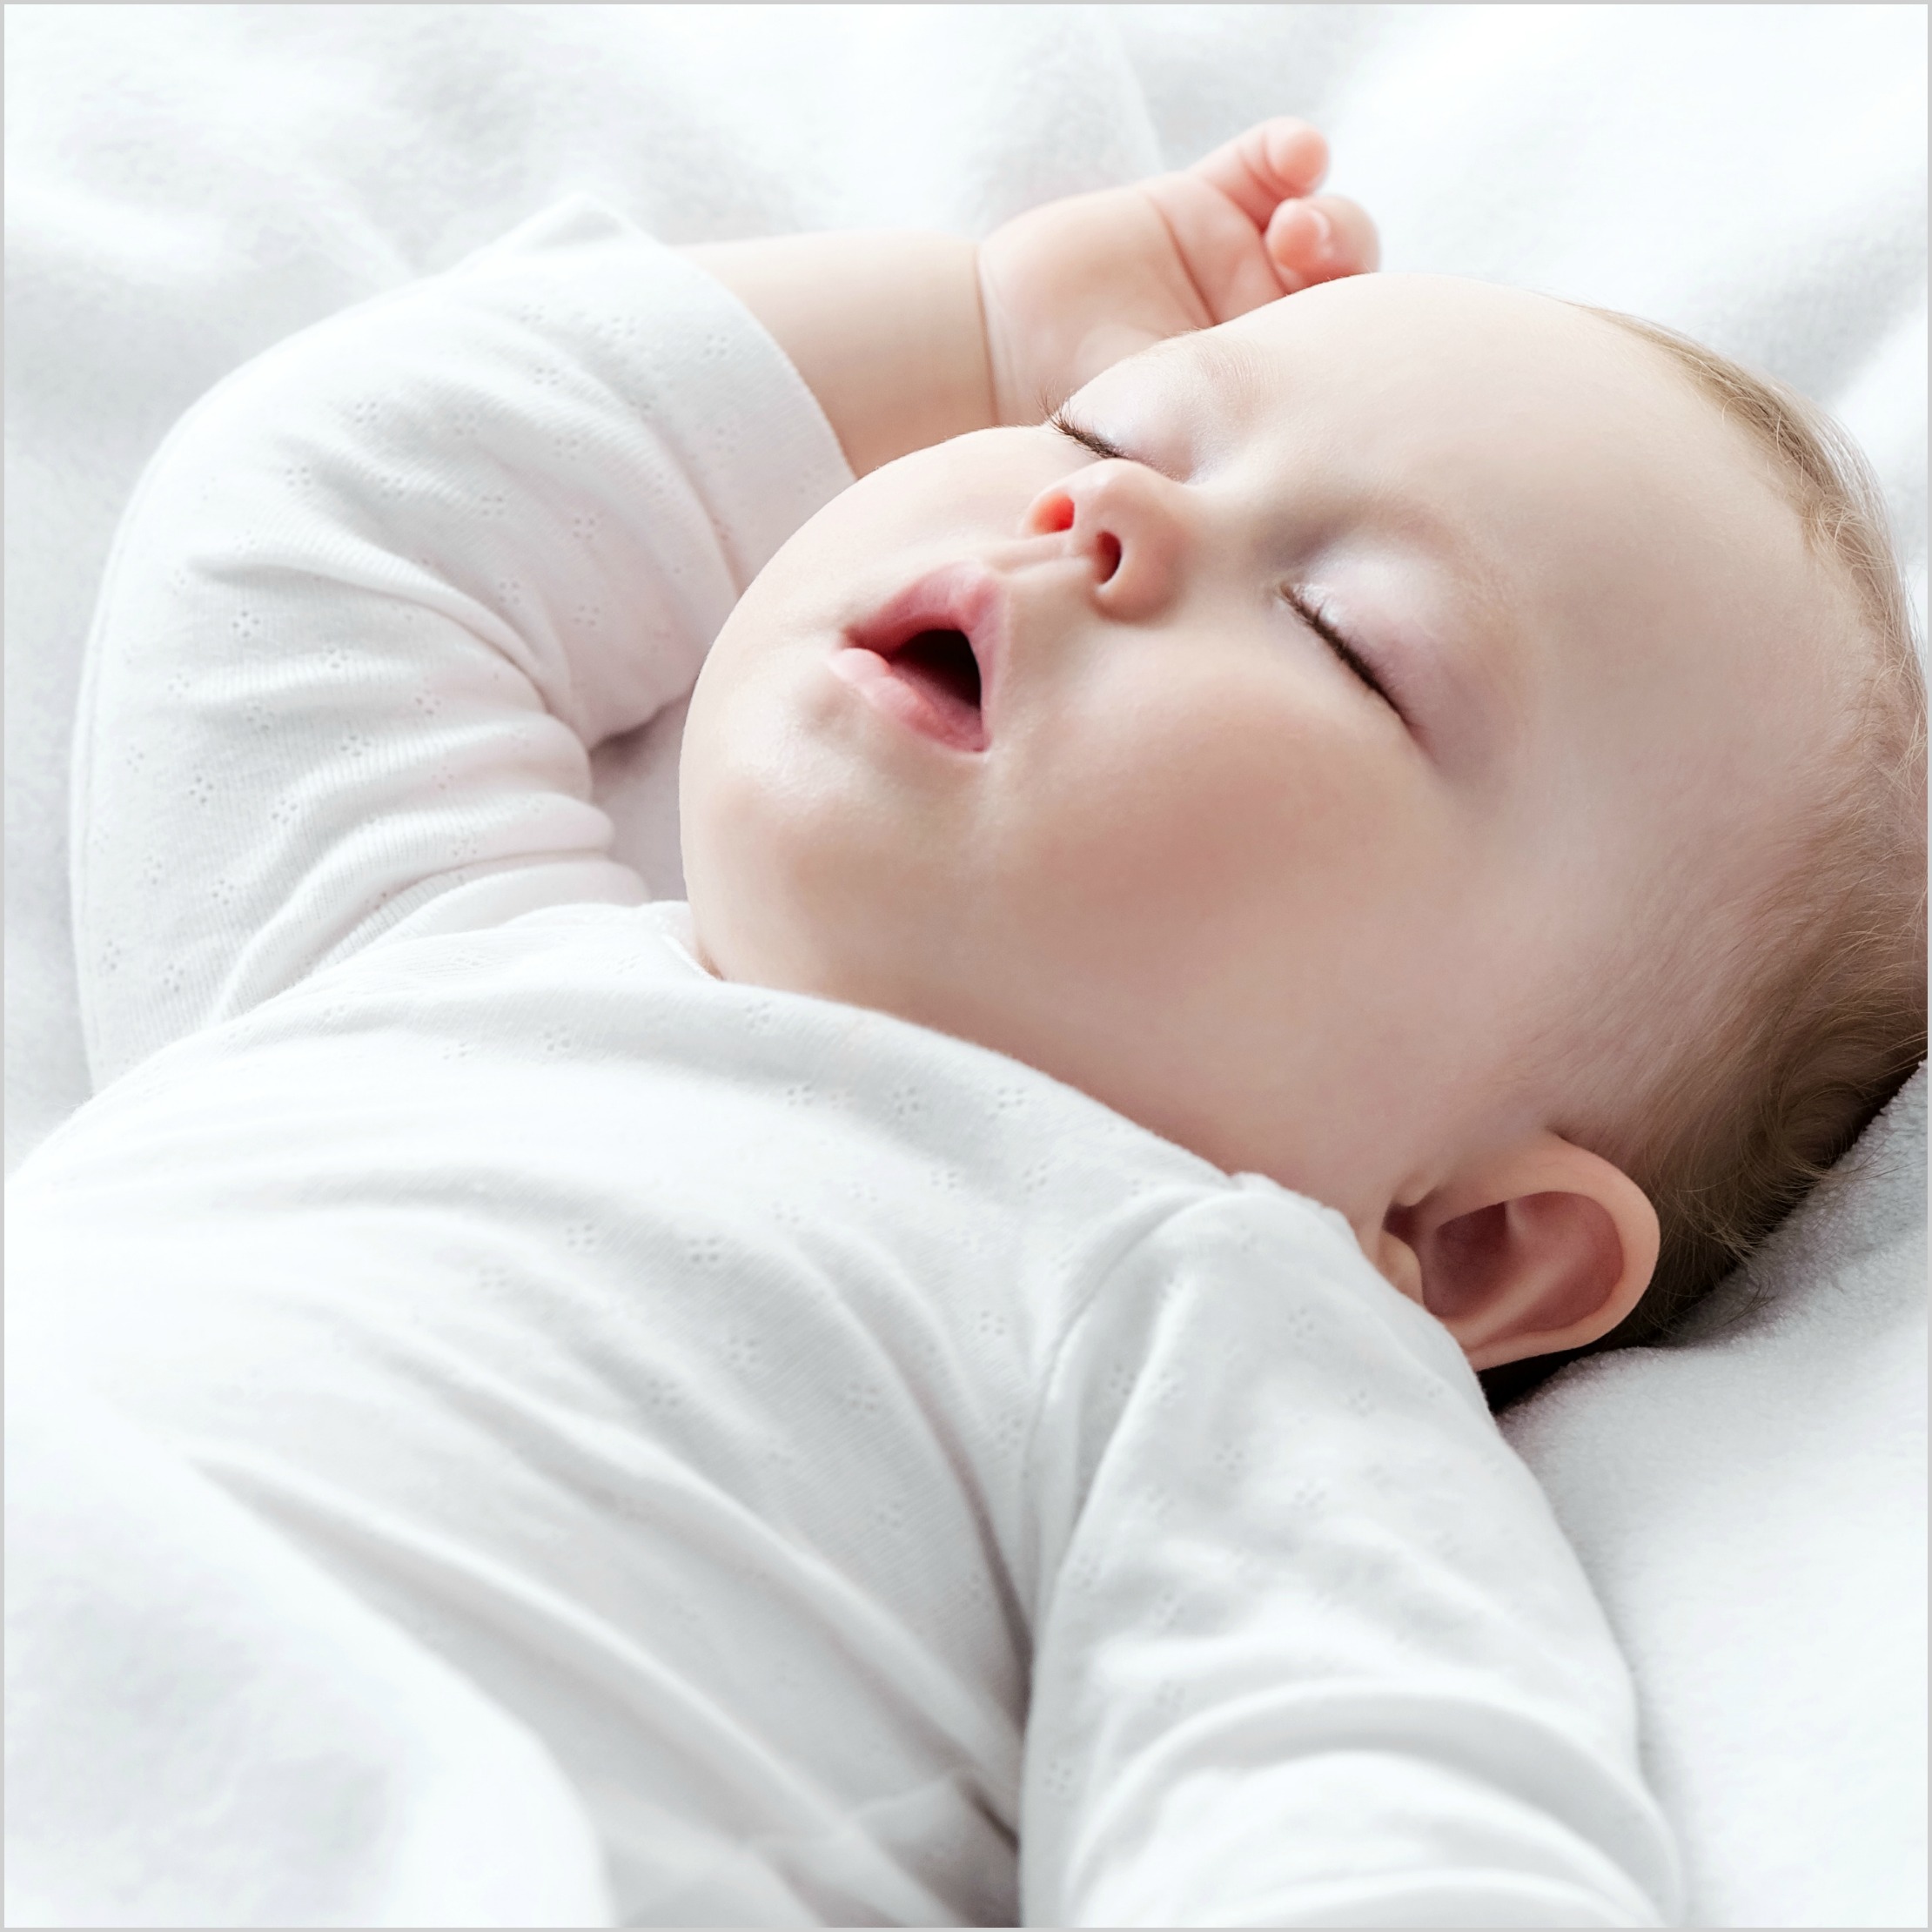 6 Proven Baby Sleep Tips Every Parent Should Know